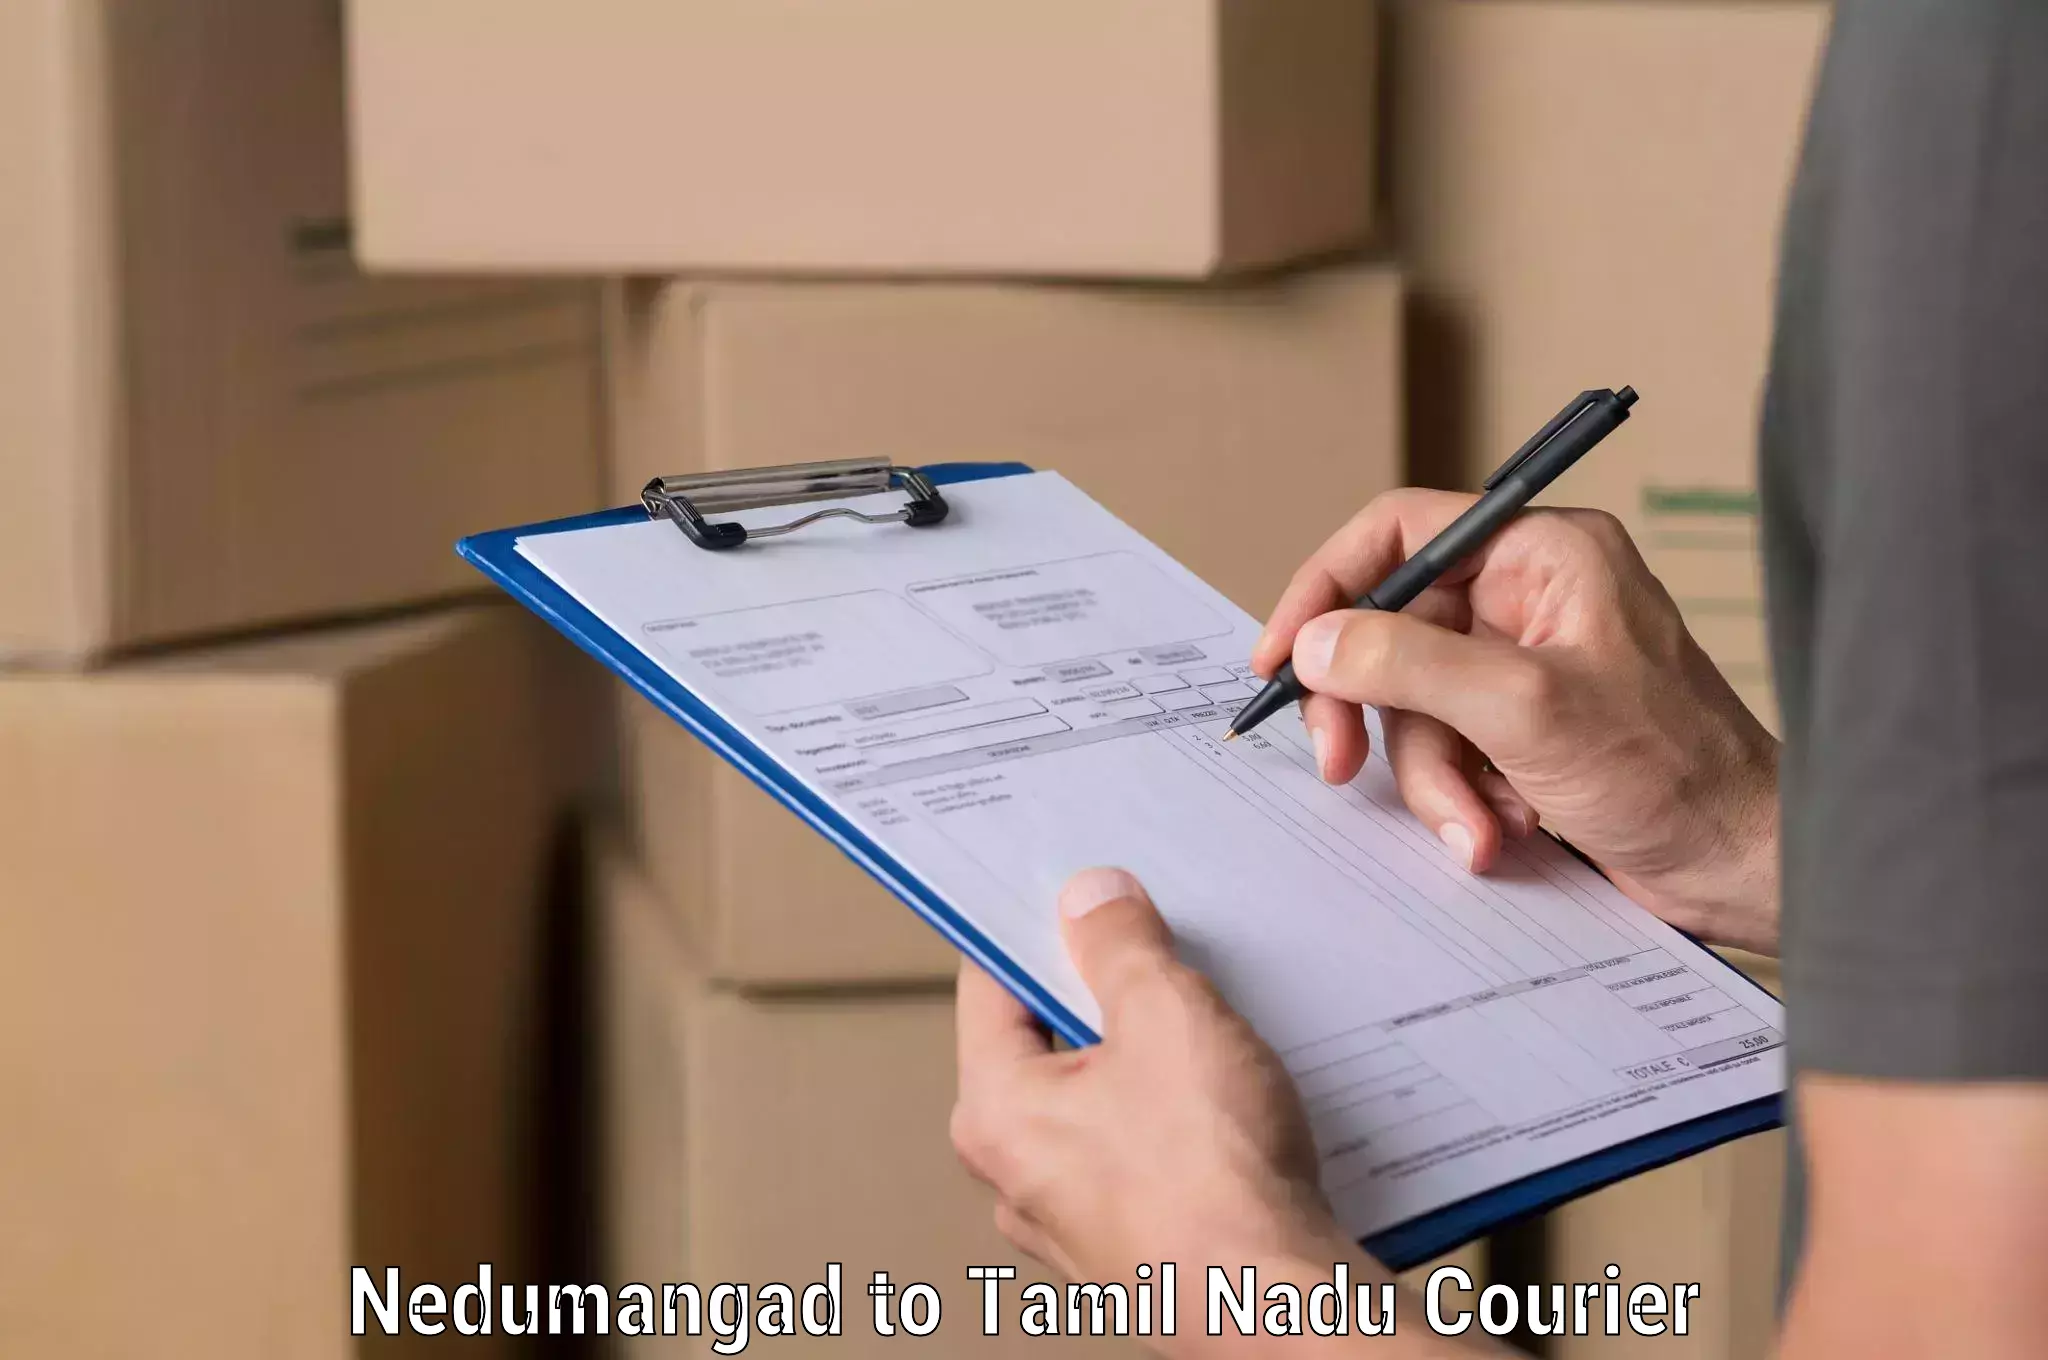 Large-scale shipping solutions Nedumangad to Ambattur